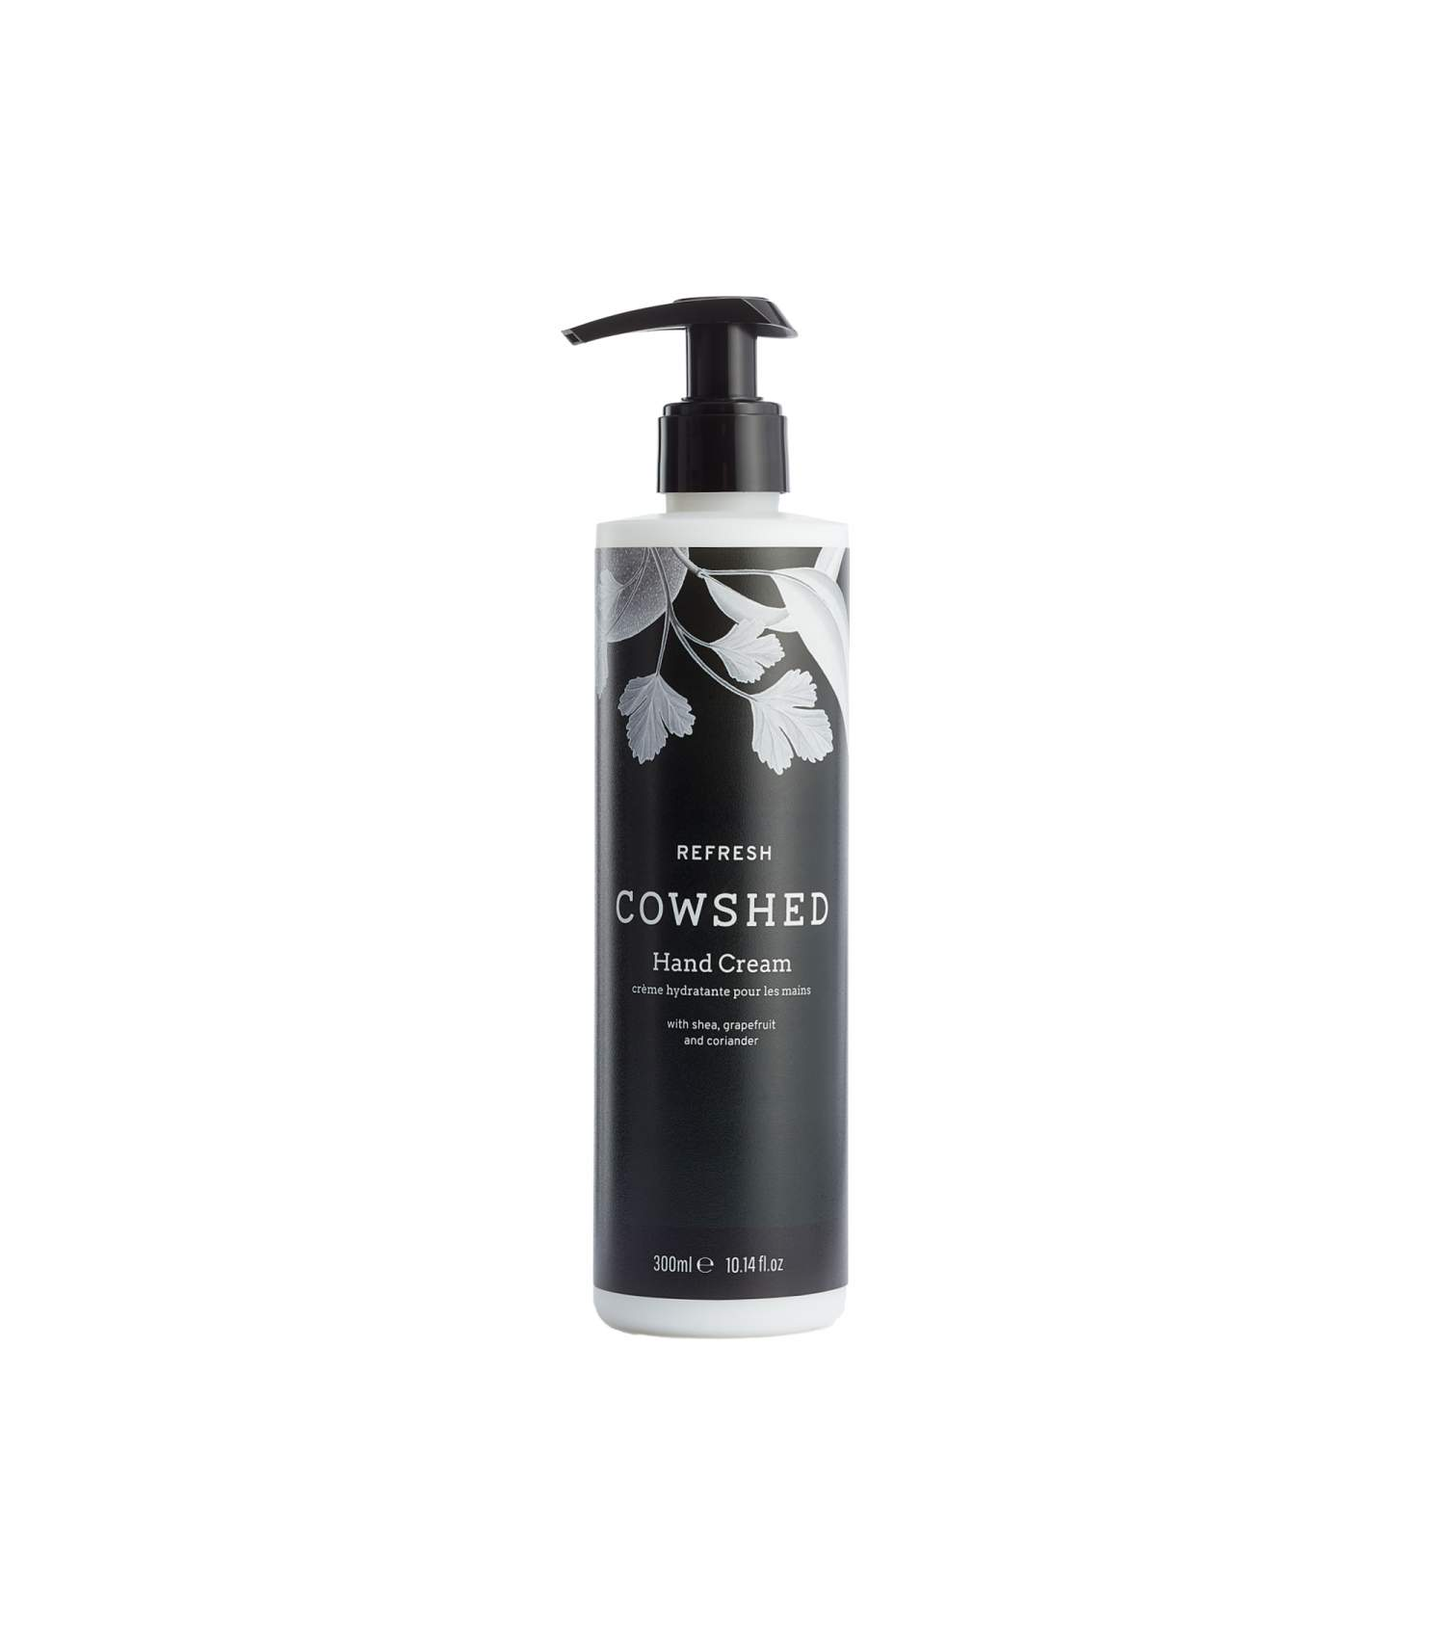 COWSHED Refresh Hand Cream